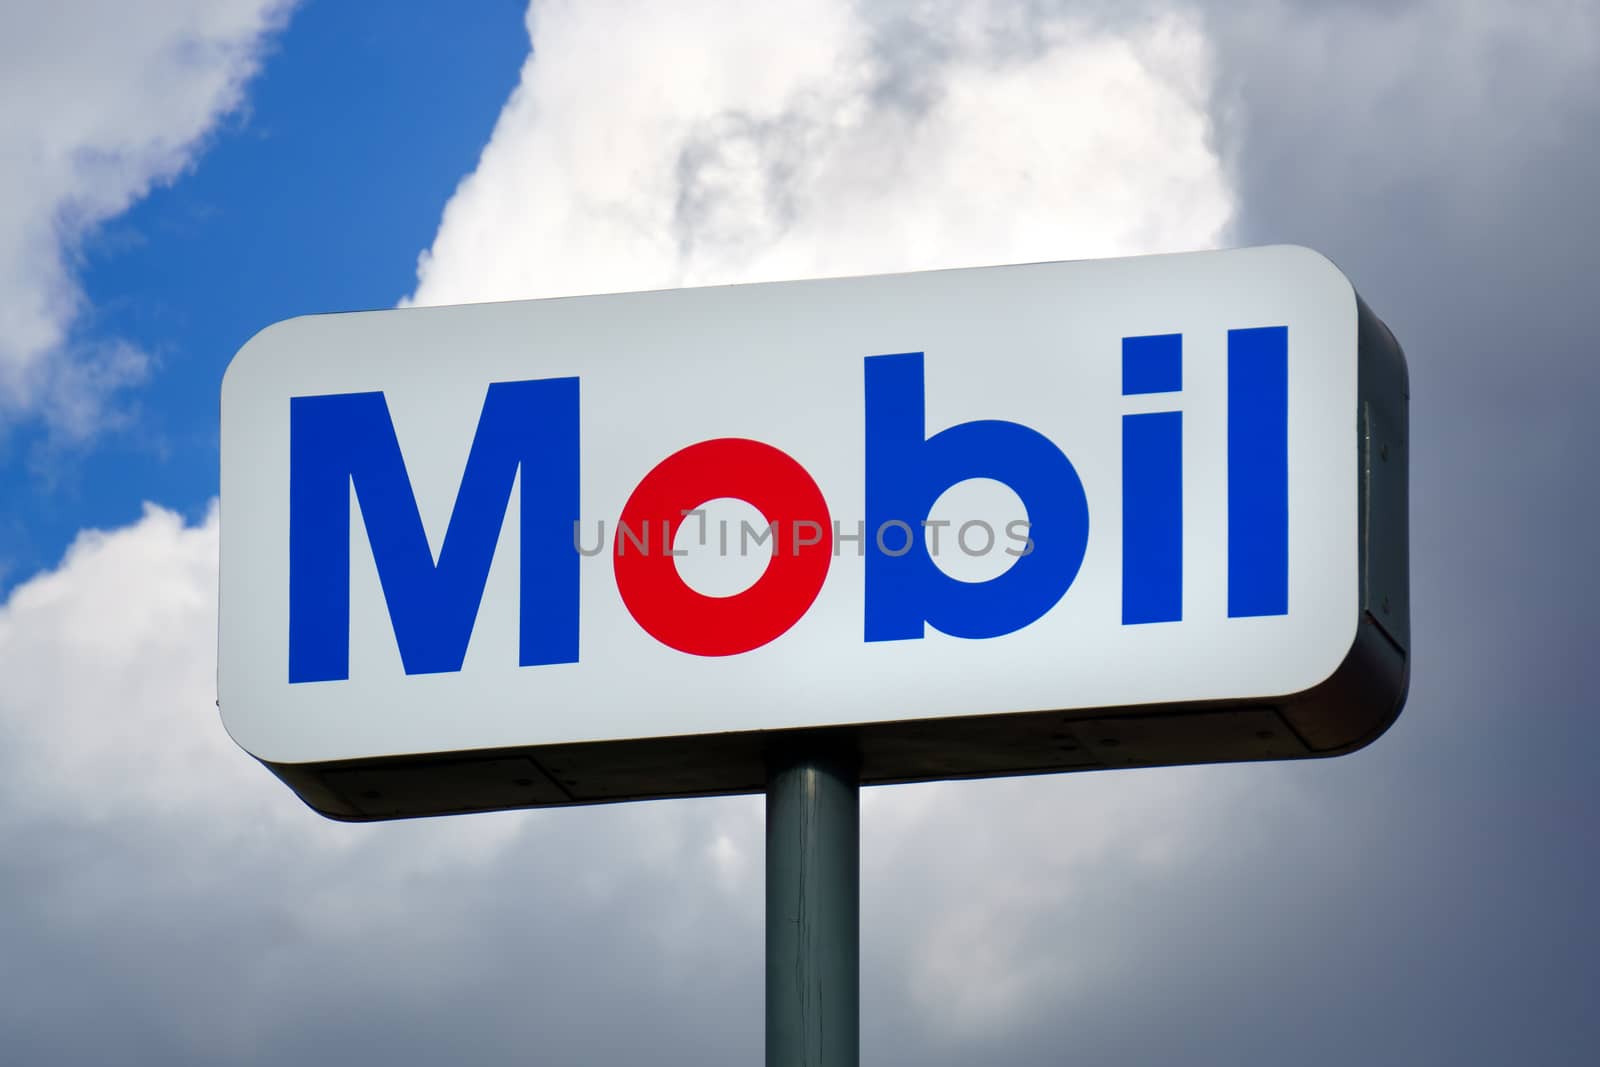 CANYON COUNTRY,CA/USA - OCTOBER 28, 2015:  Mobil gas station sign and logo. Mobil is a major American oil company.